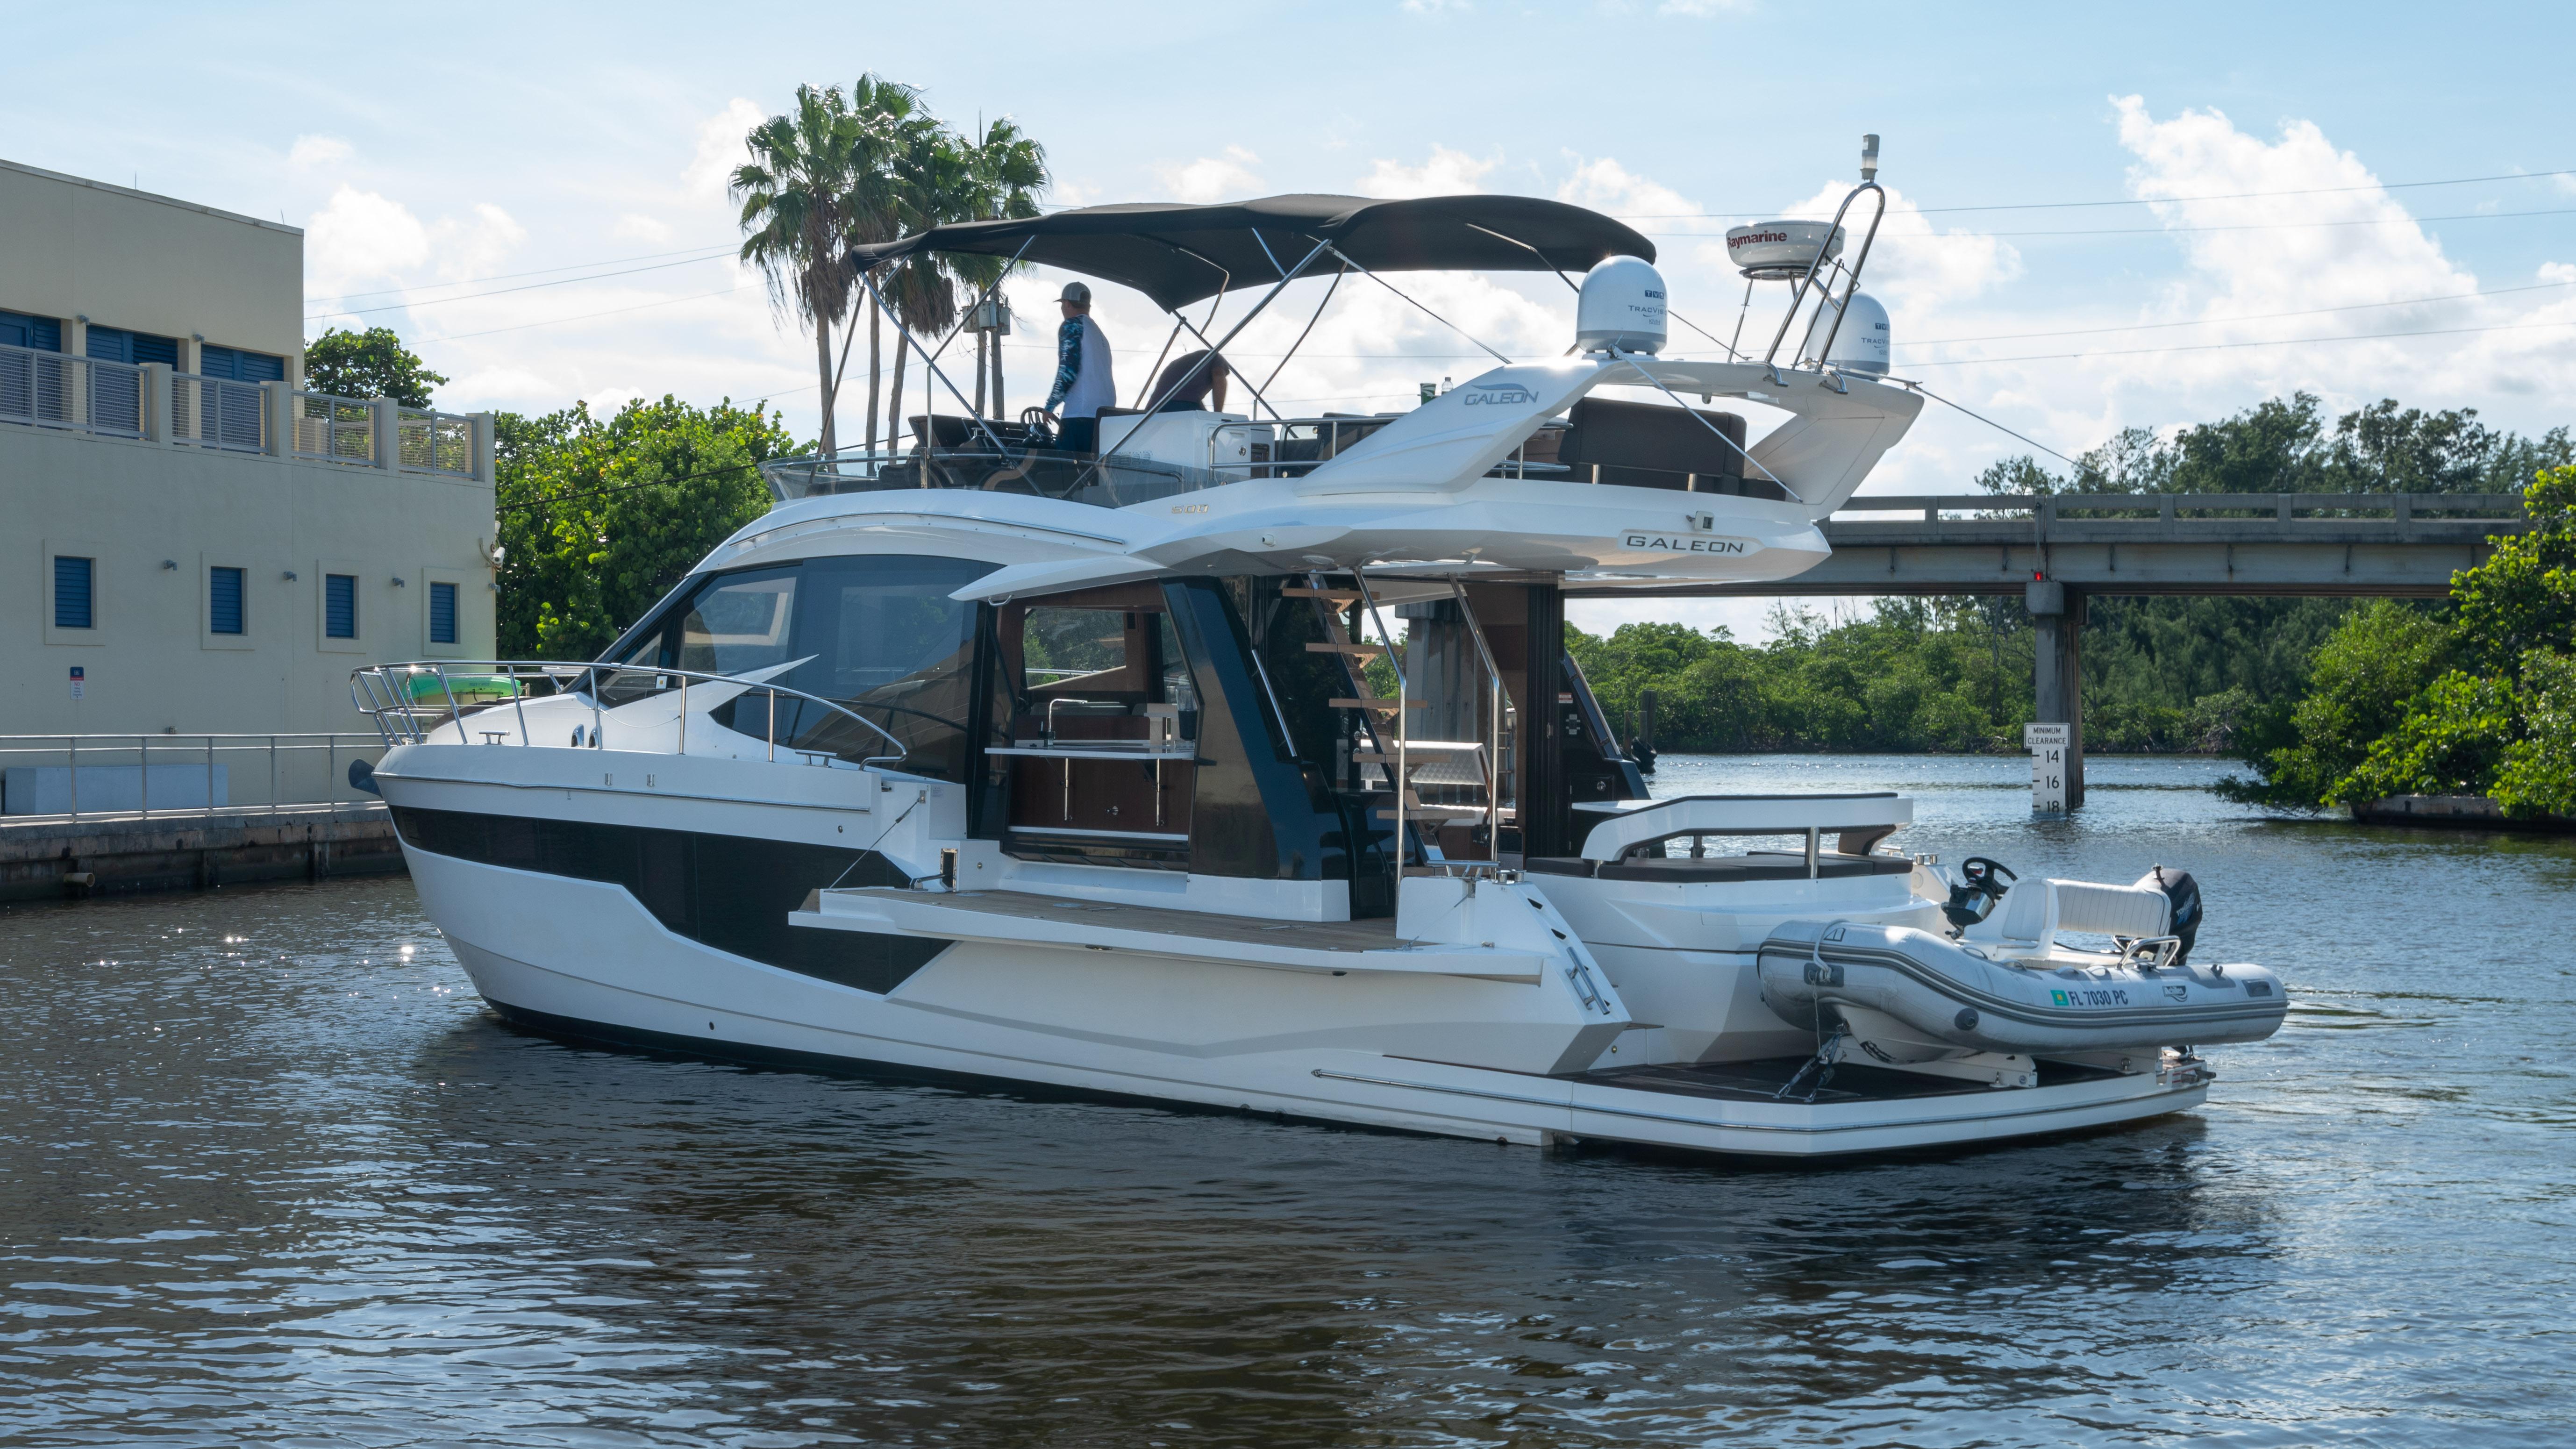 galeon yacht 50 for sale